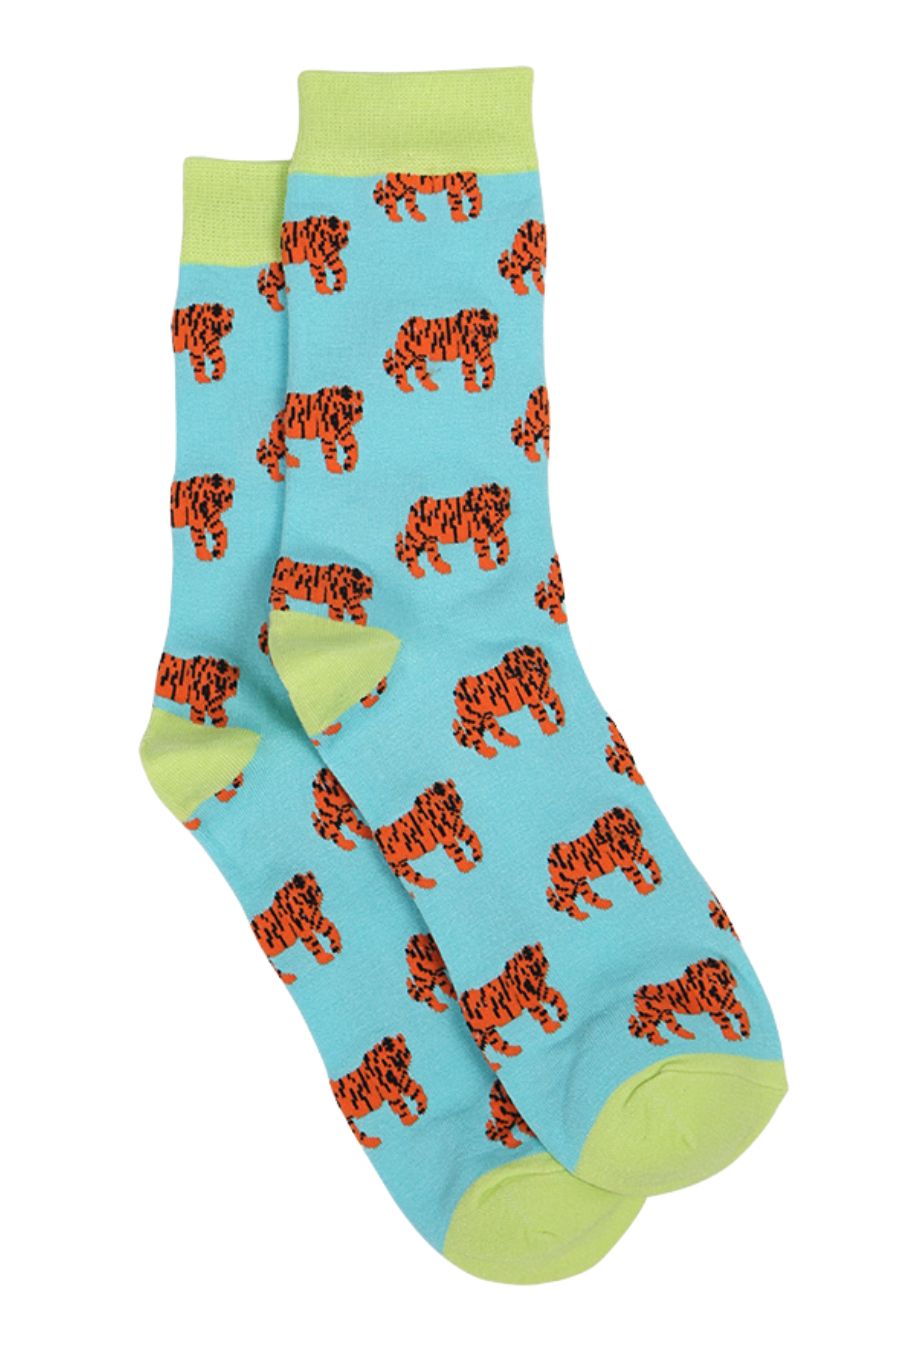 turquoise and green dress socks with tigers all over